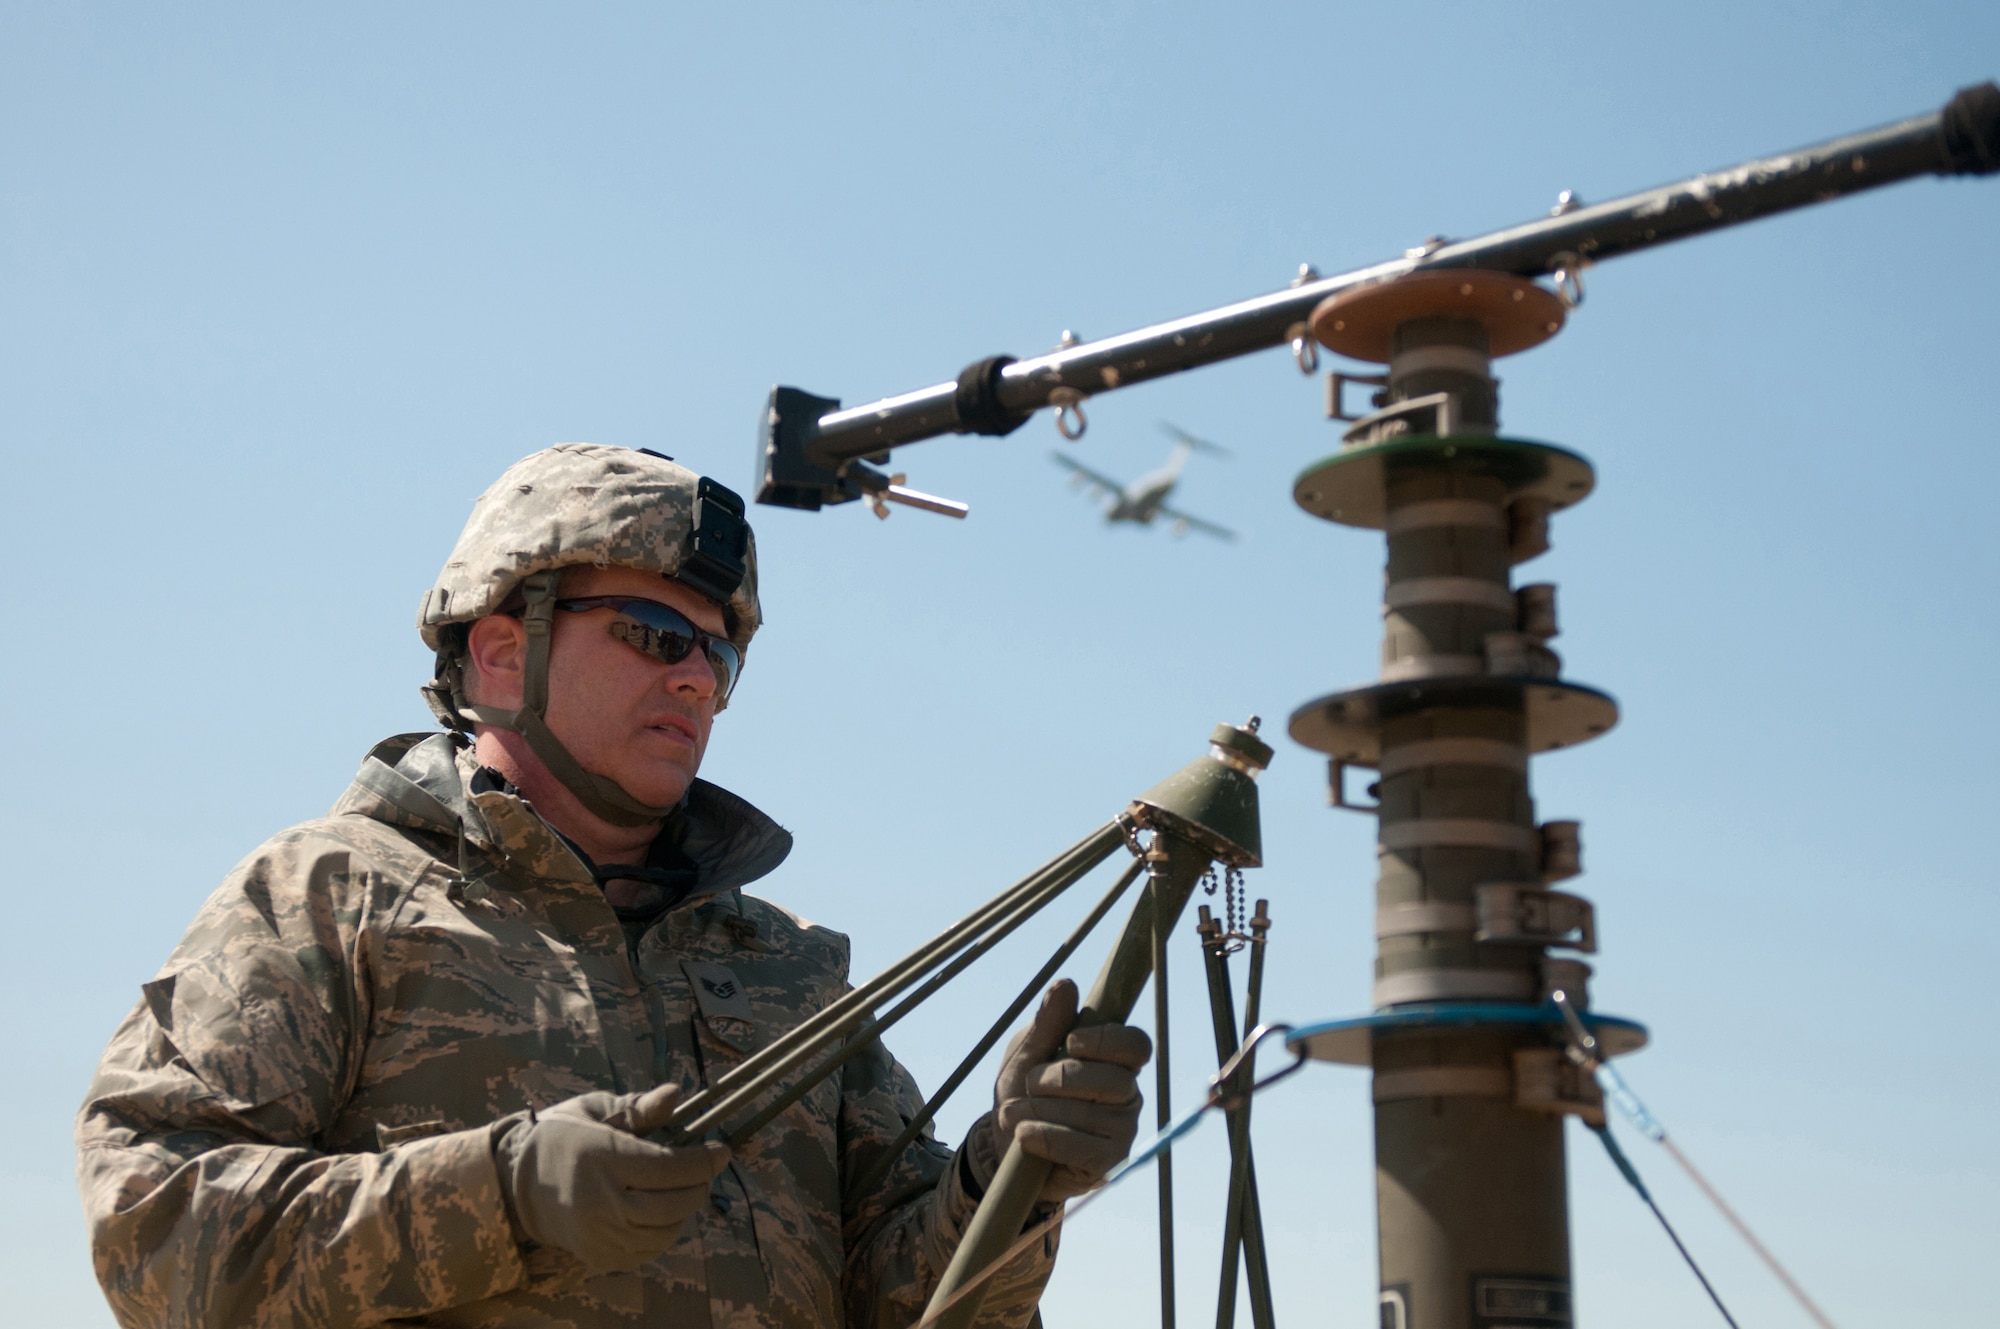 Staff Sgt. Michael Railey, a communication specialist in the Kentucky Air National Guard's123rd Contingency Response Group, assembles an antenna group at Joint Base McGuire-Dix-Lakehurst, N.J., on March 27, 2012. Railey was participating in a U.S. Transportation Command exercise designed to test the Kentucky unit’s ability to establish a Joint Task Force-Port Opening within 24 hours of arrival. (U.S. Air Force photo by Master Sgt. Phil Speck)